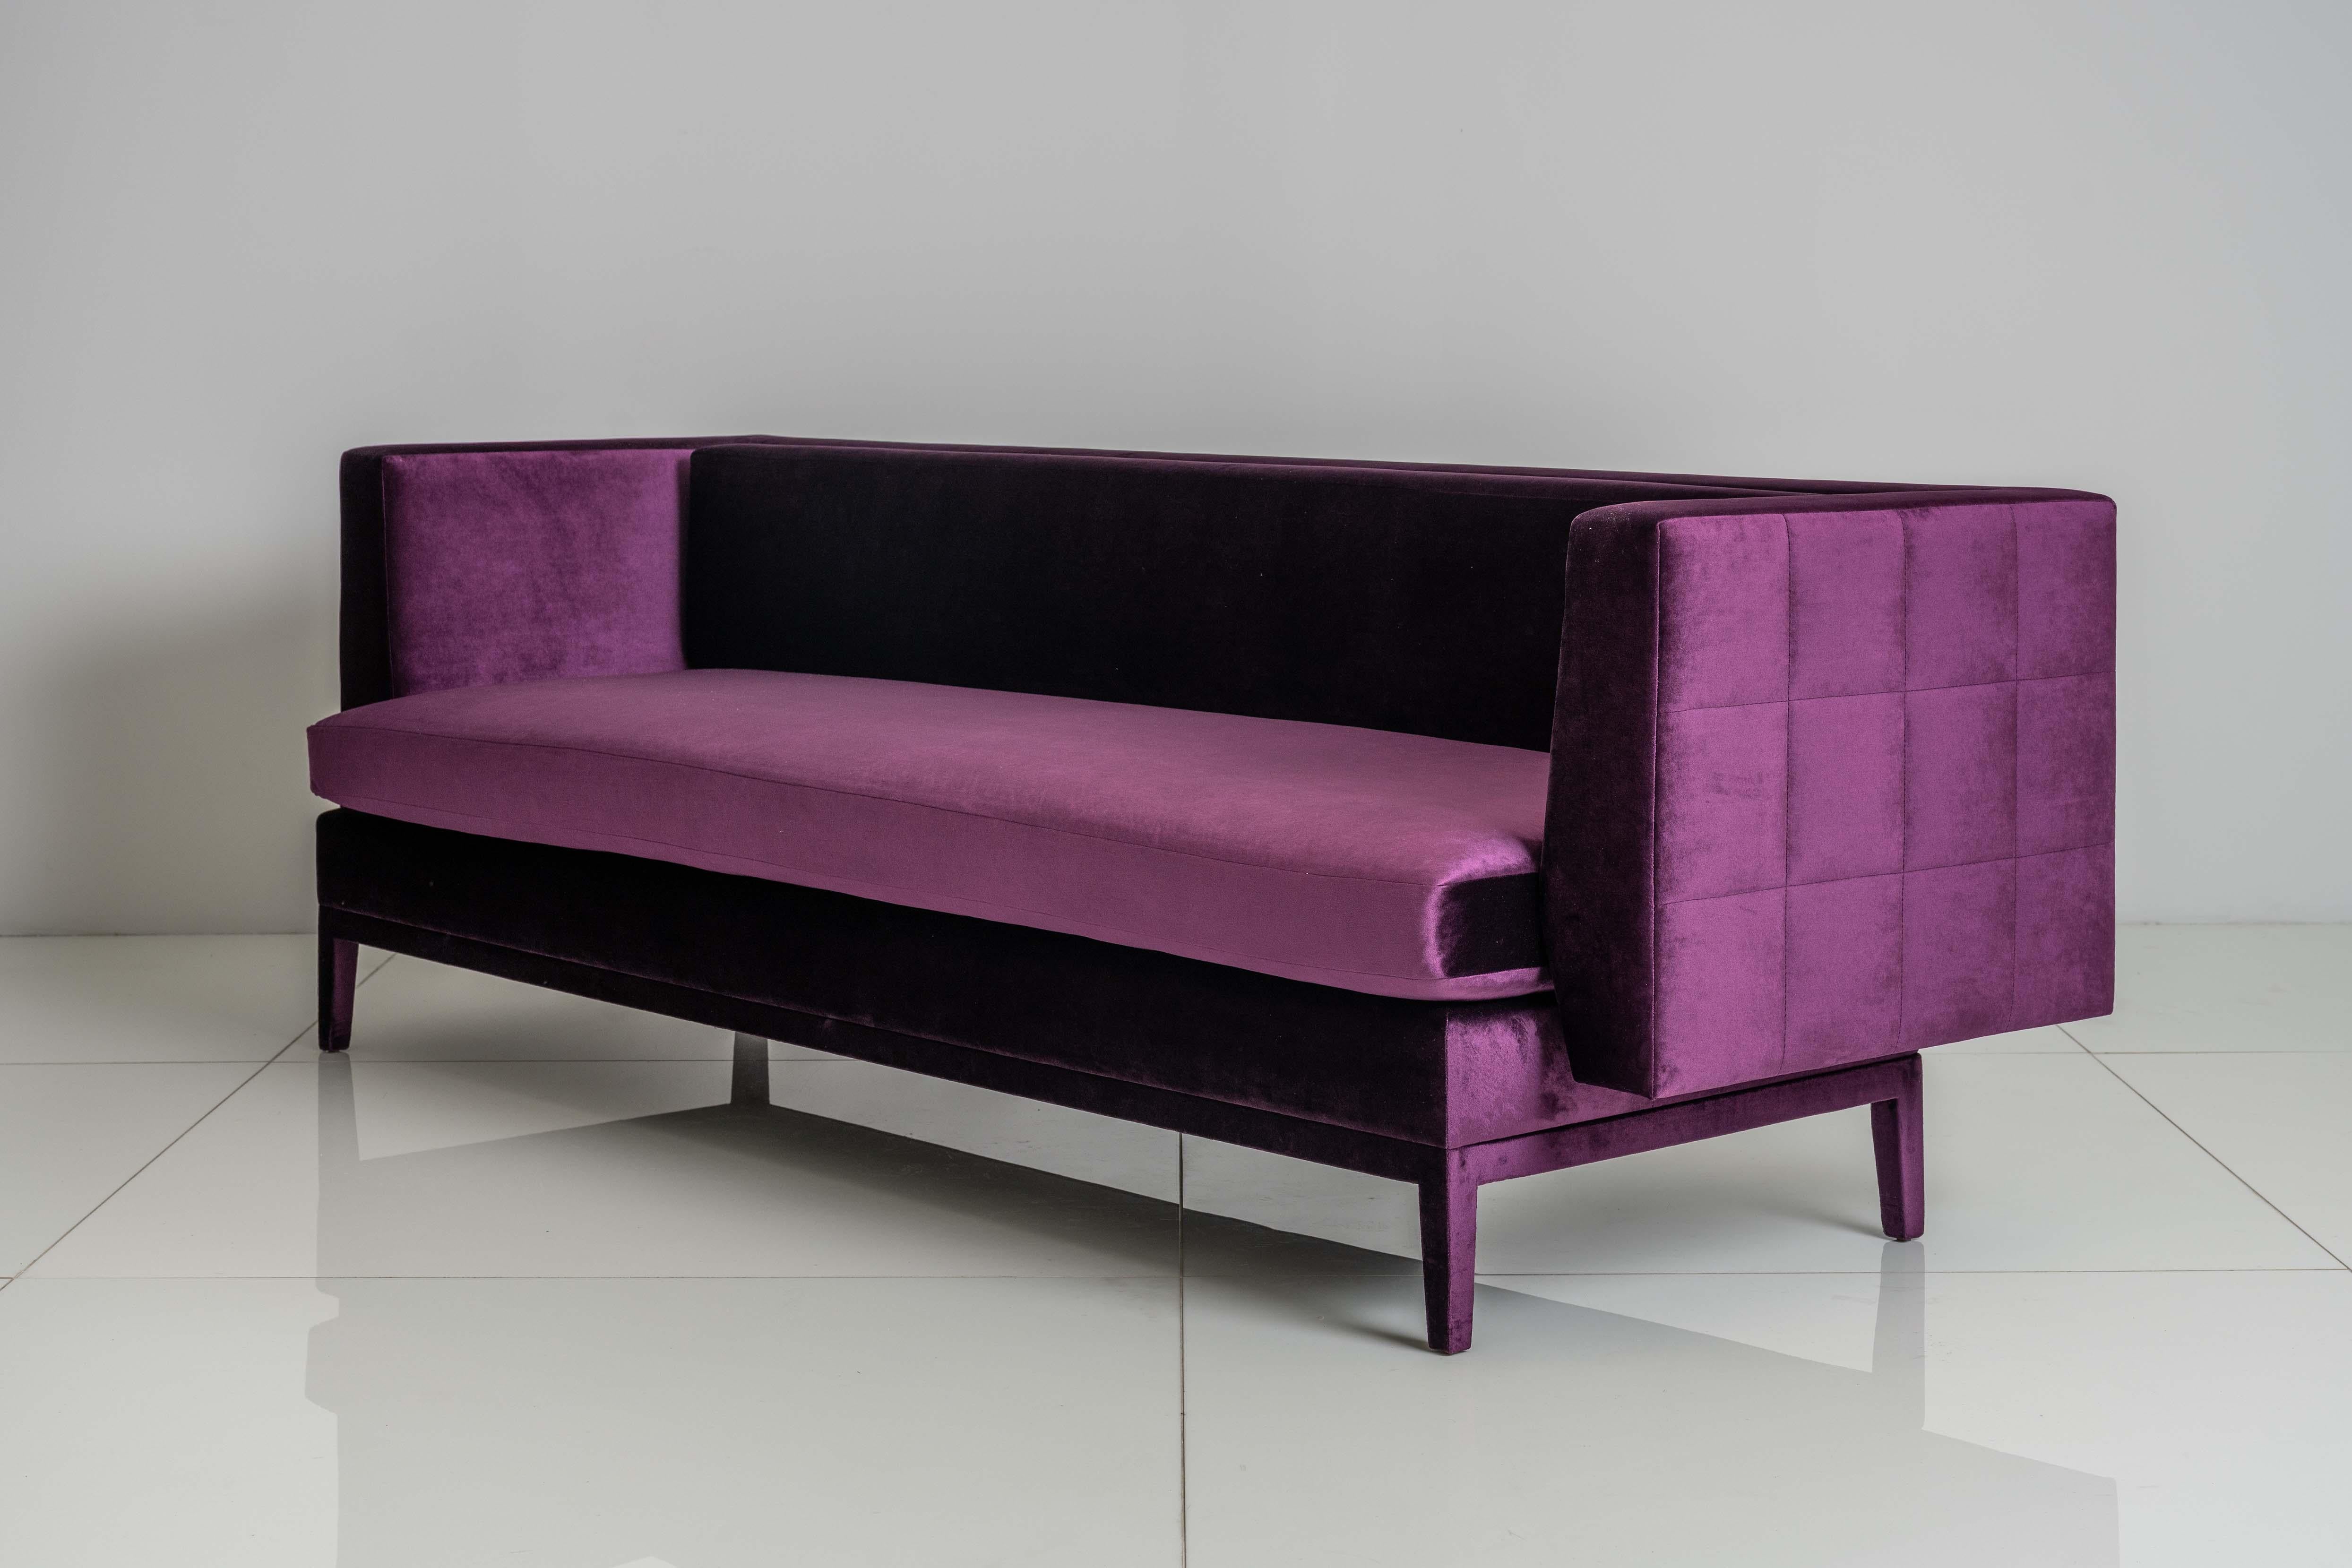 The Liston Sofa was conceived and executed as a fully upholstered piece, including the legs, to give it a unity of form. Arms and back float away from the seat. This 2.0 version includes a loose bench seat cushion and semi-attached back cushion. The